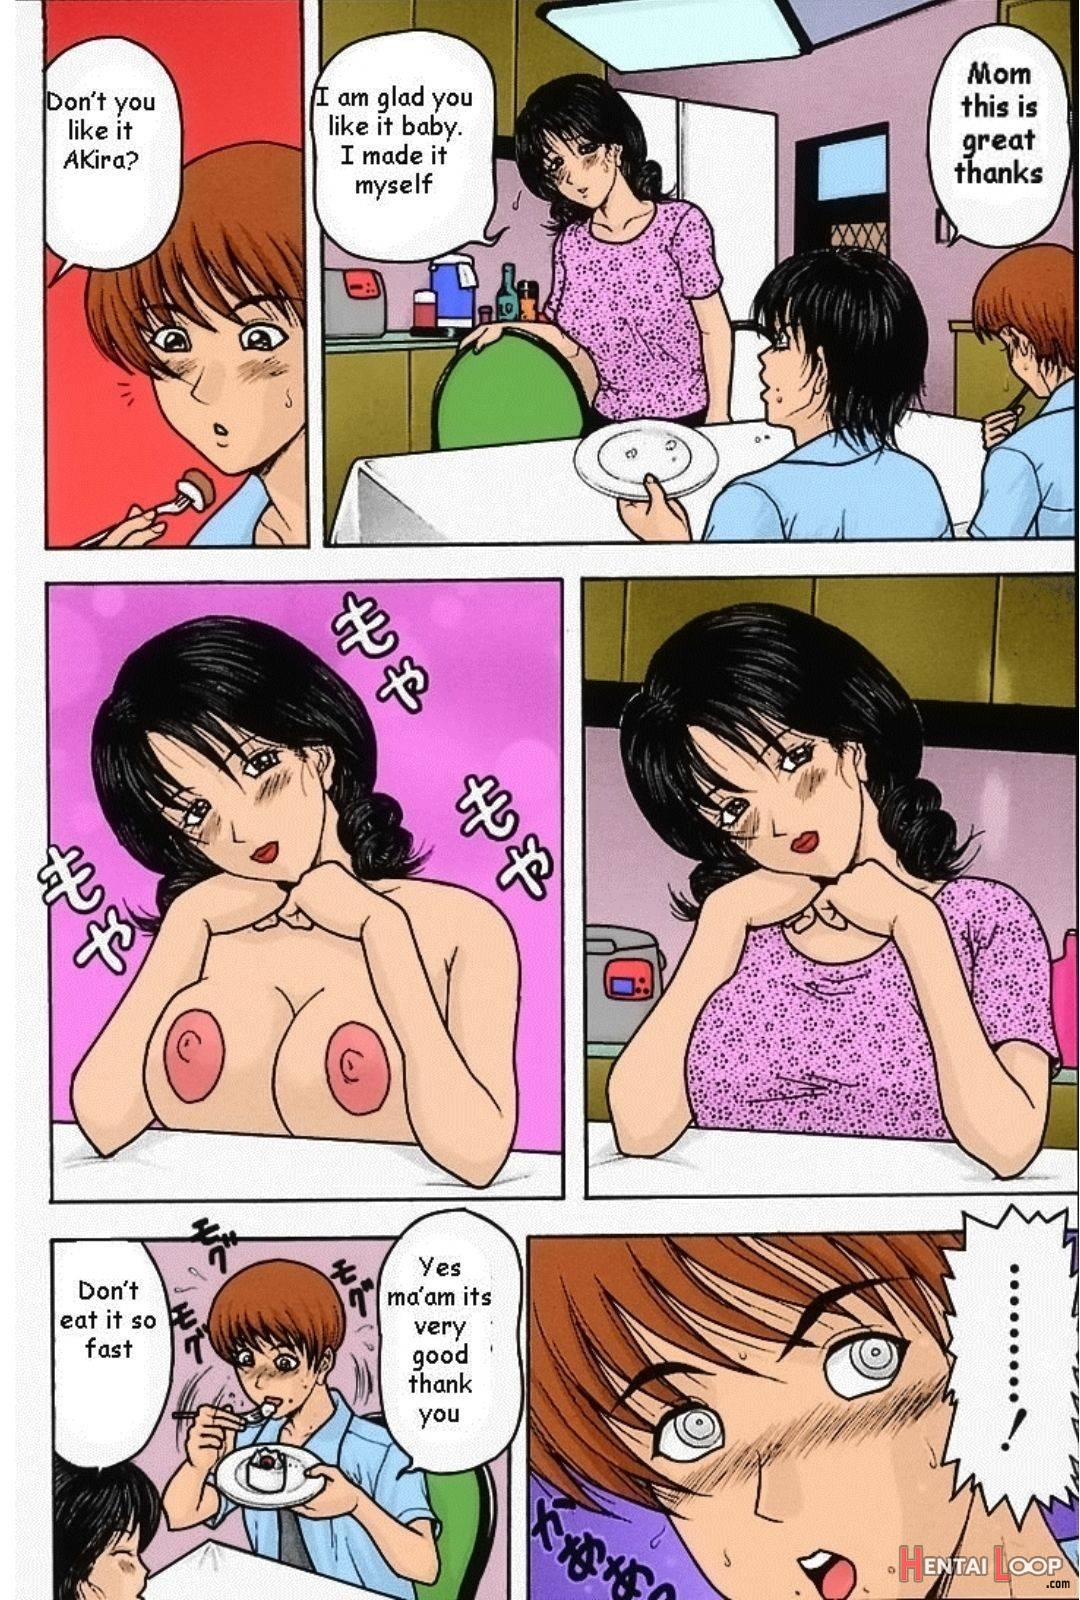 Best Friend’s Mom – Colorized page 4